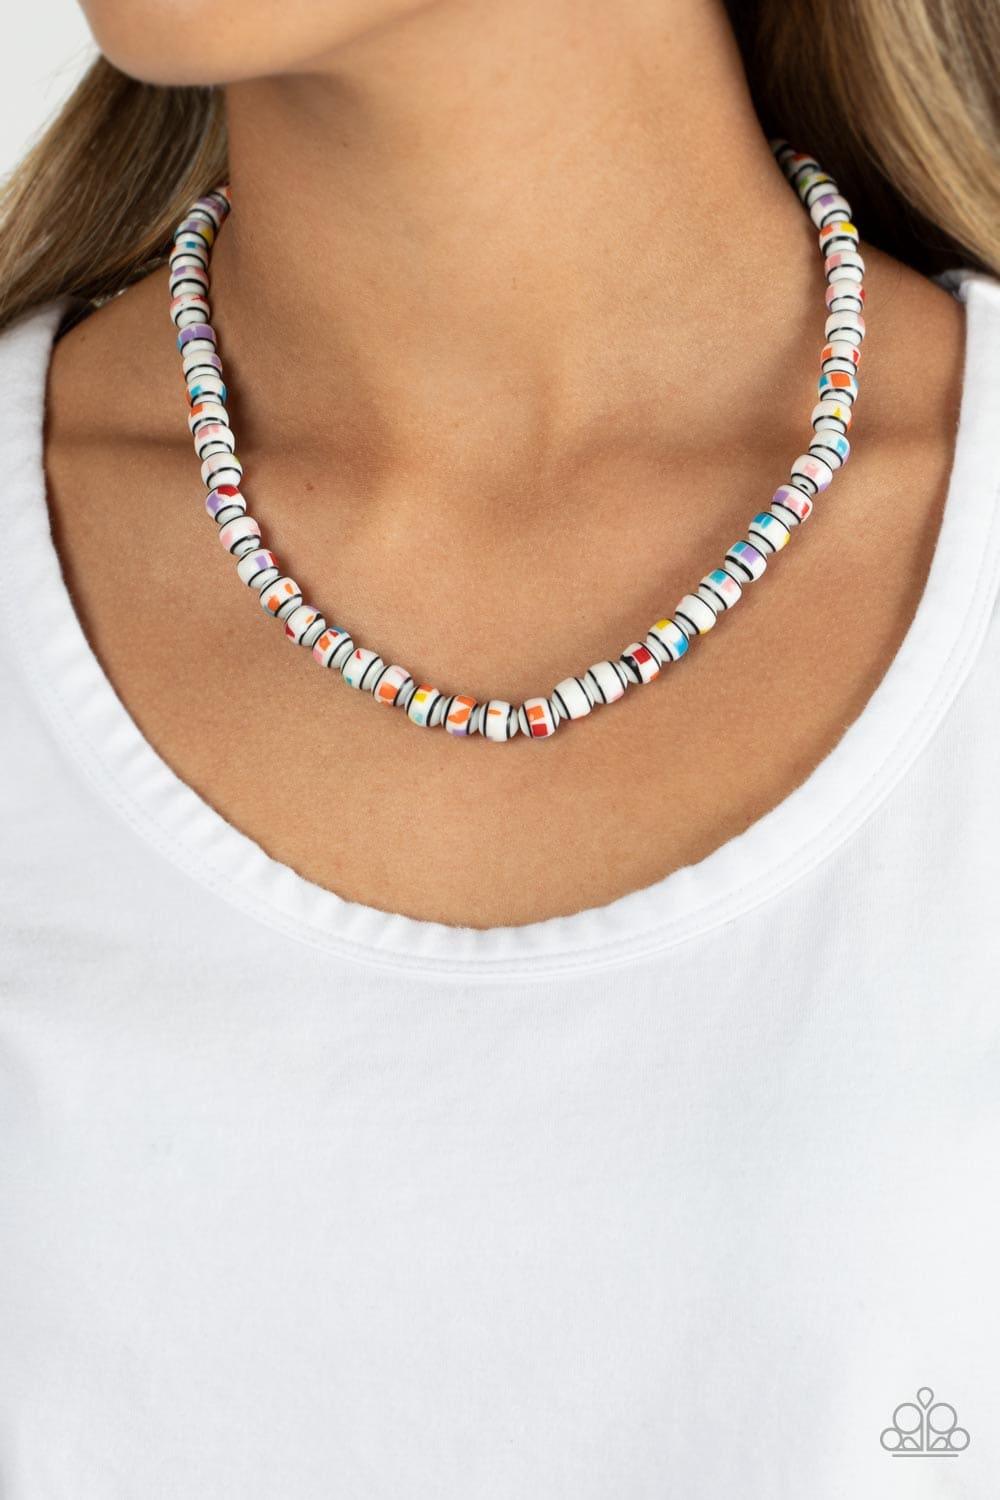 Paparazzi Accessories - Gobstopper Glamour - White Necklace - Bling by JessieK